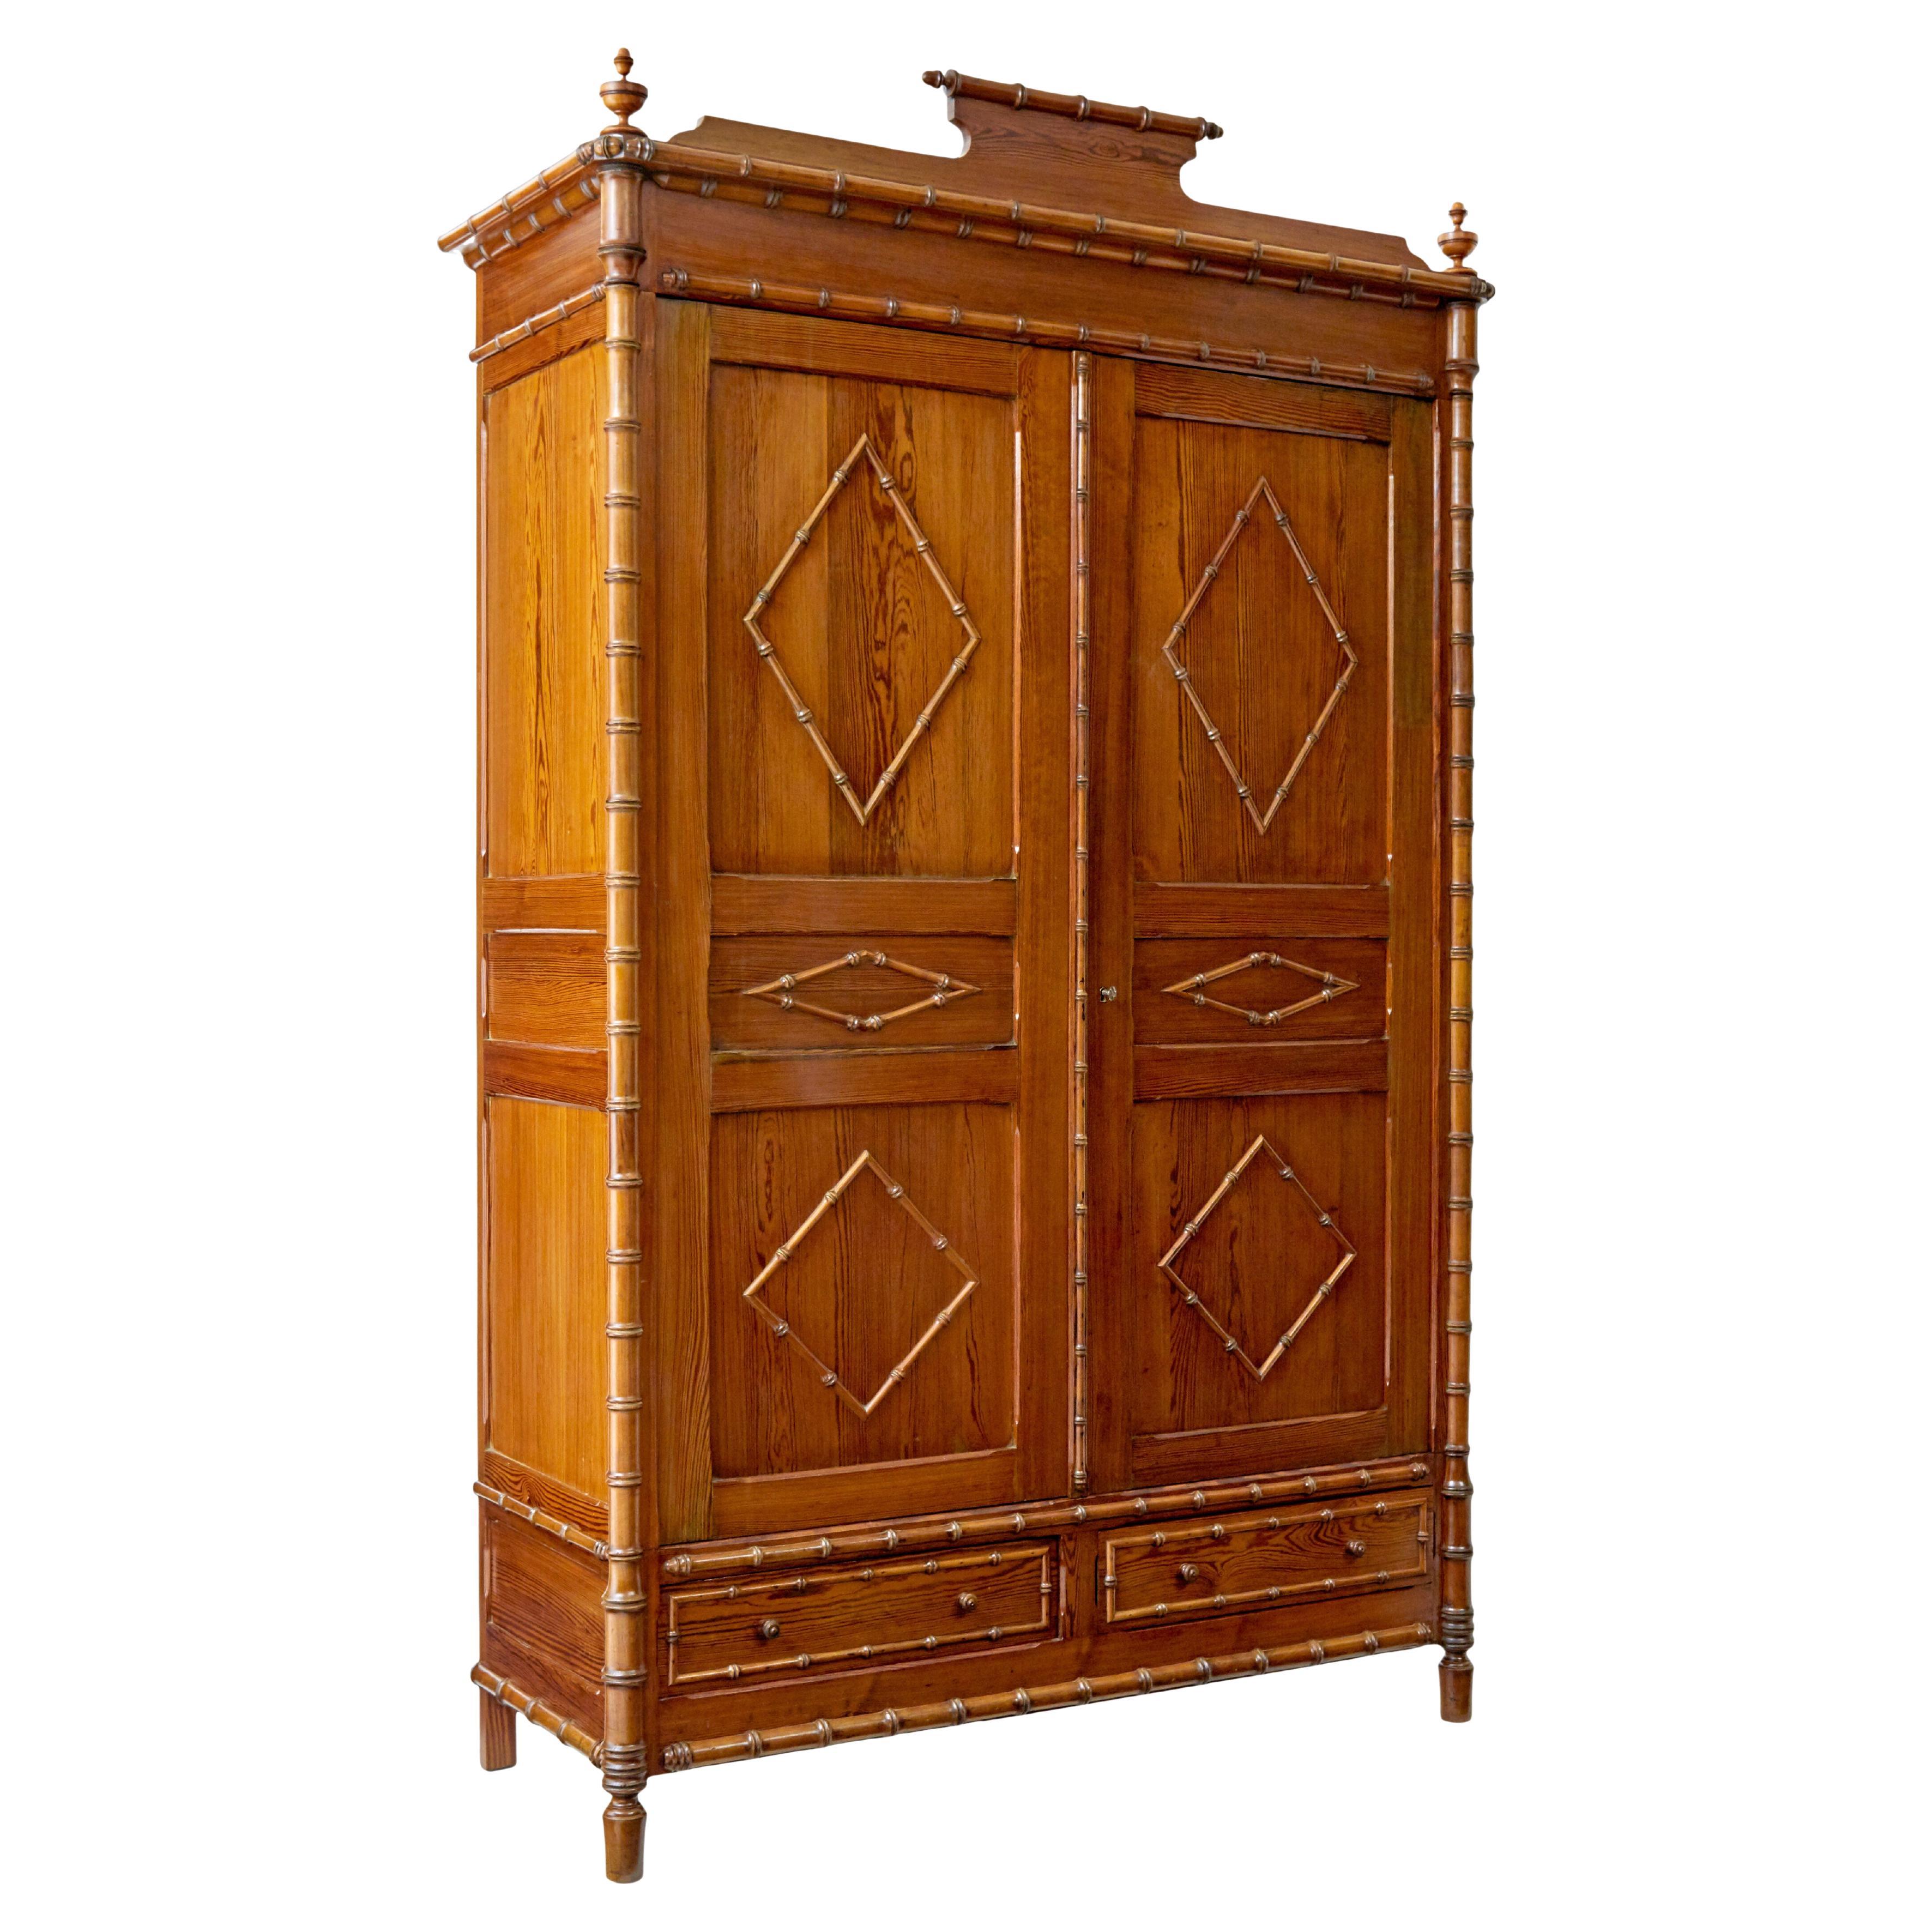 Early 20th century French faux bamboo pine wardrobe